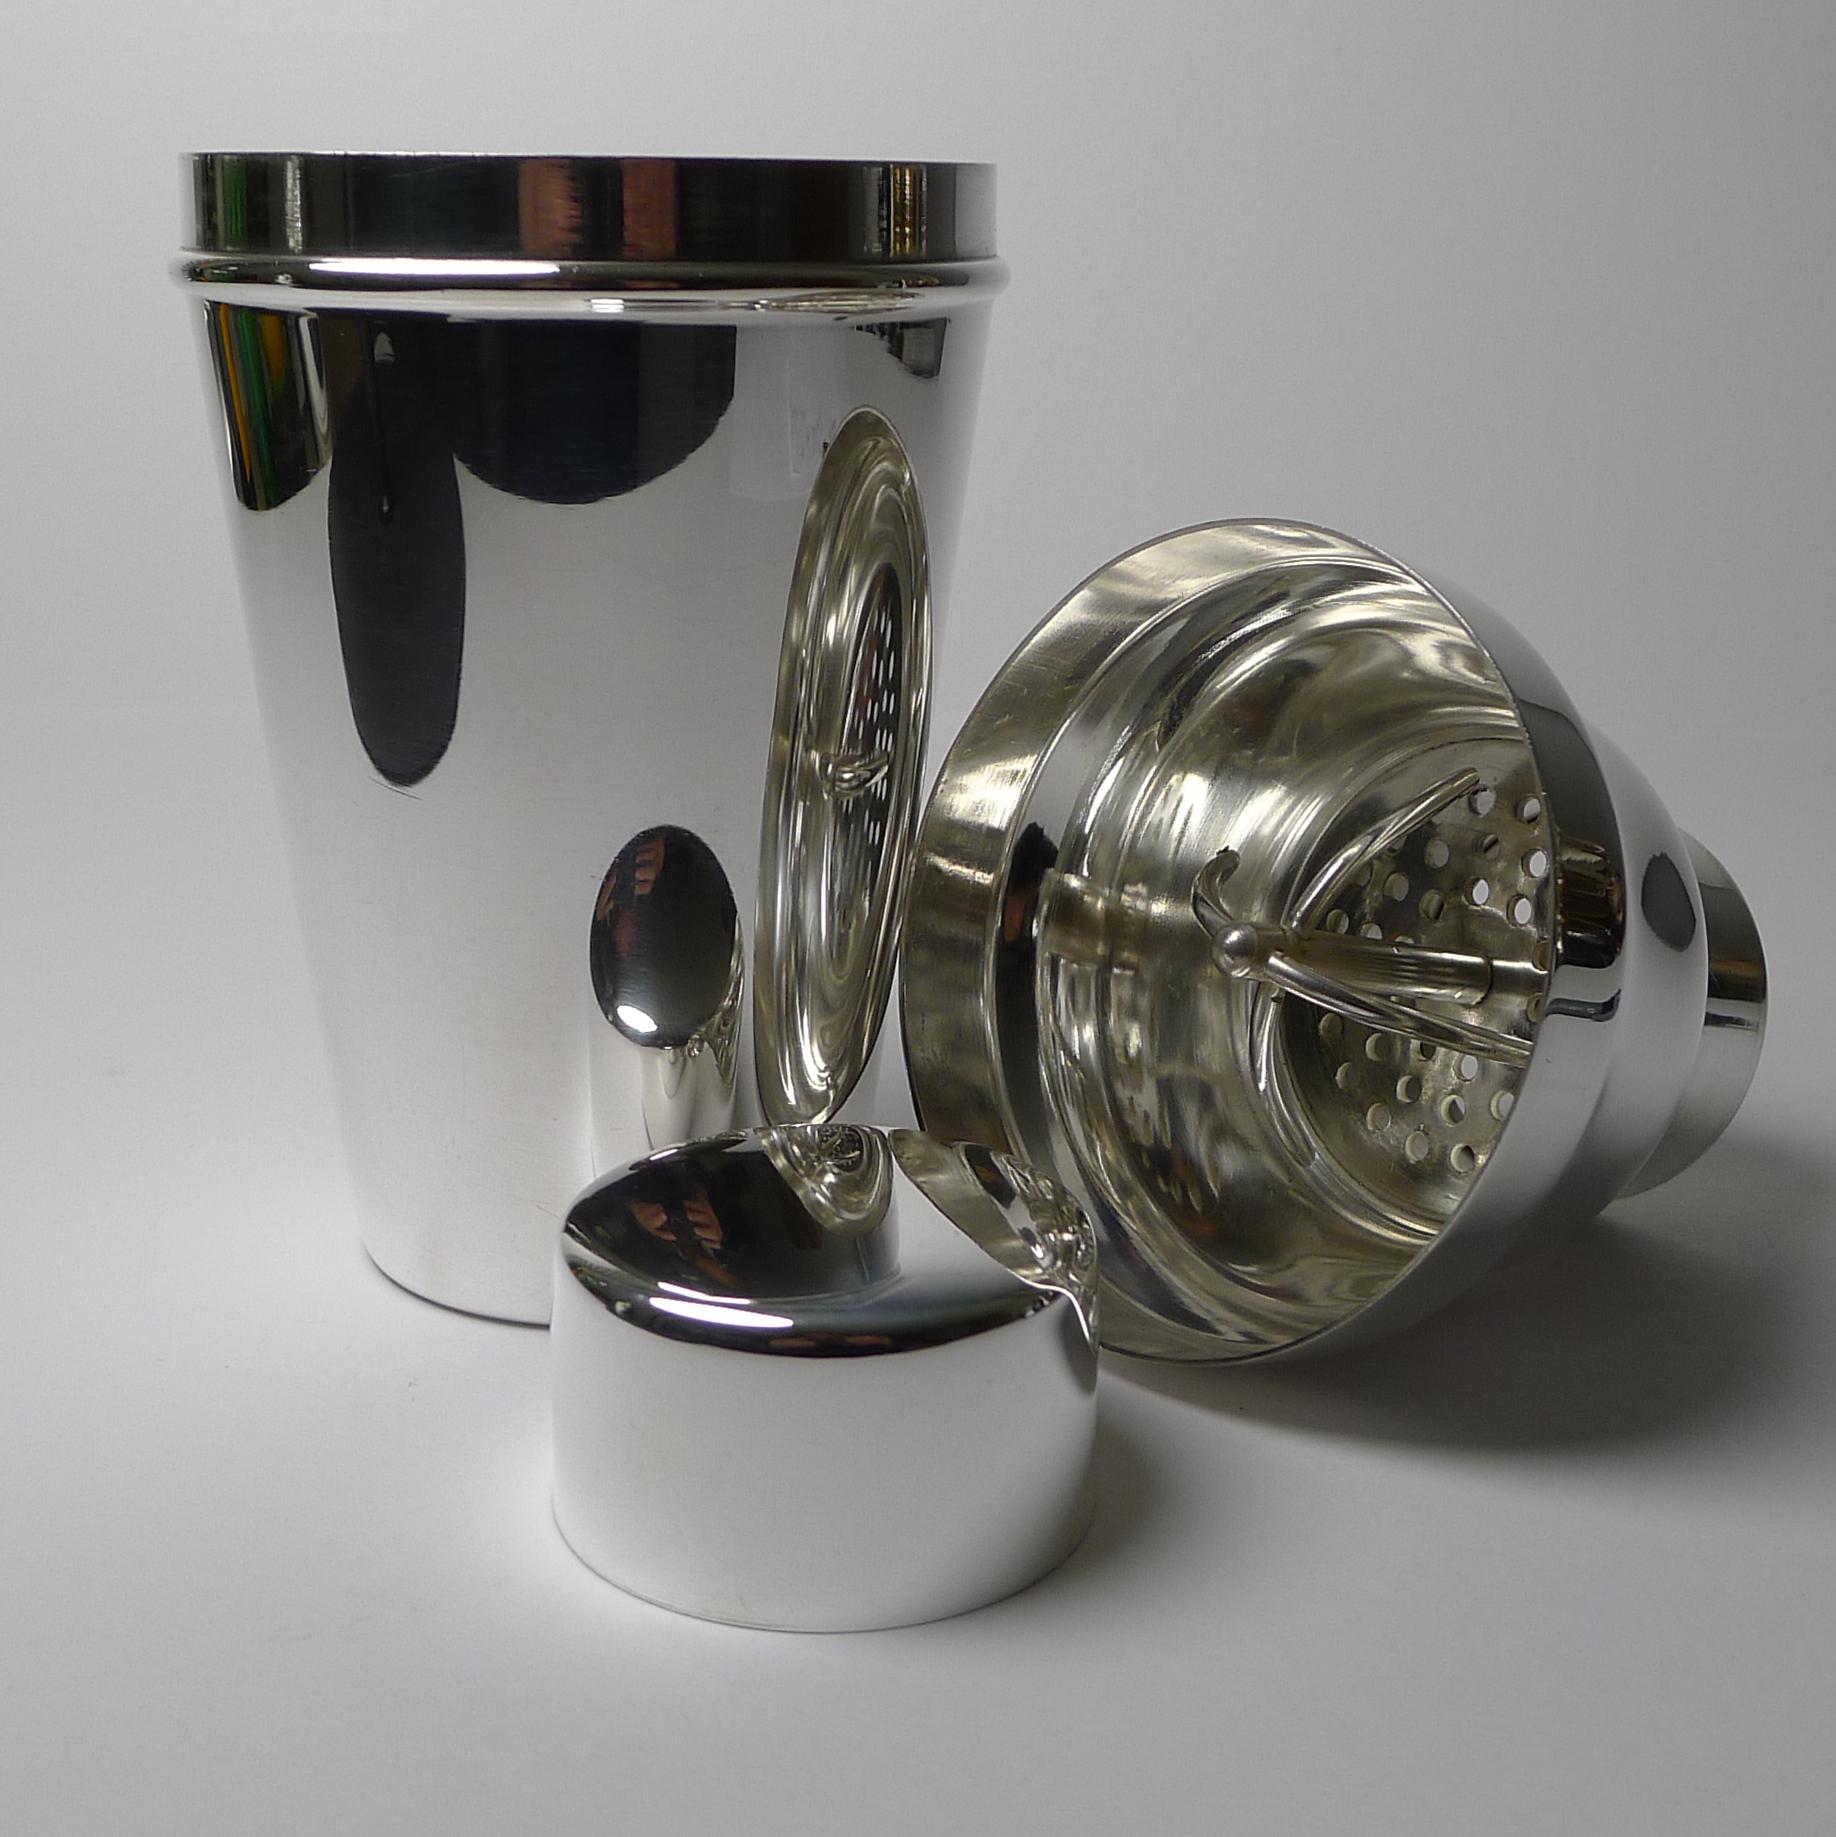 English Art Deco Cocktail Shaker by William Suckling Ltd, C.1930 For Sale 1